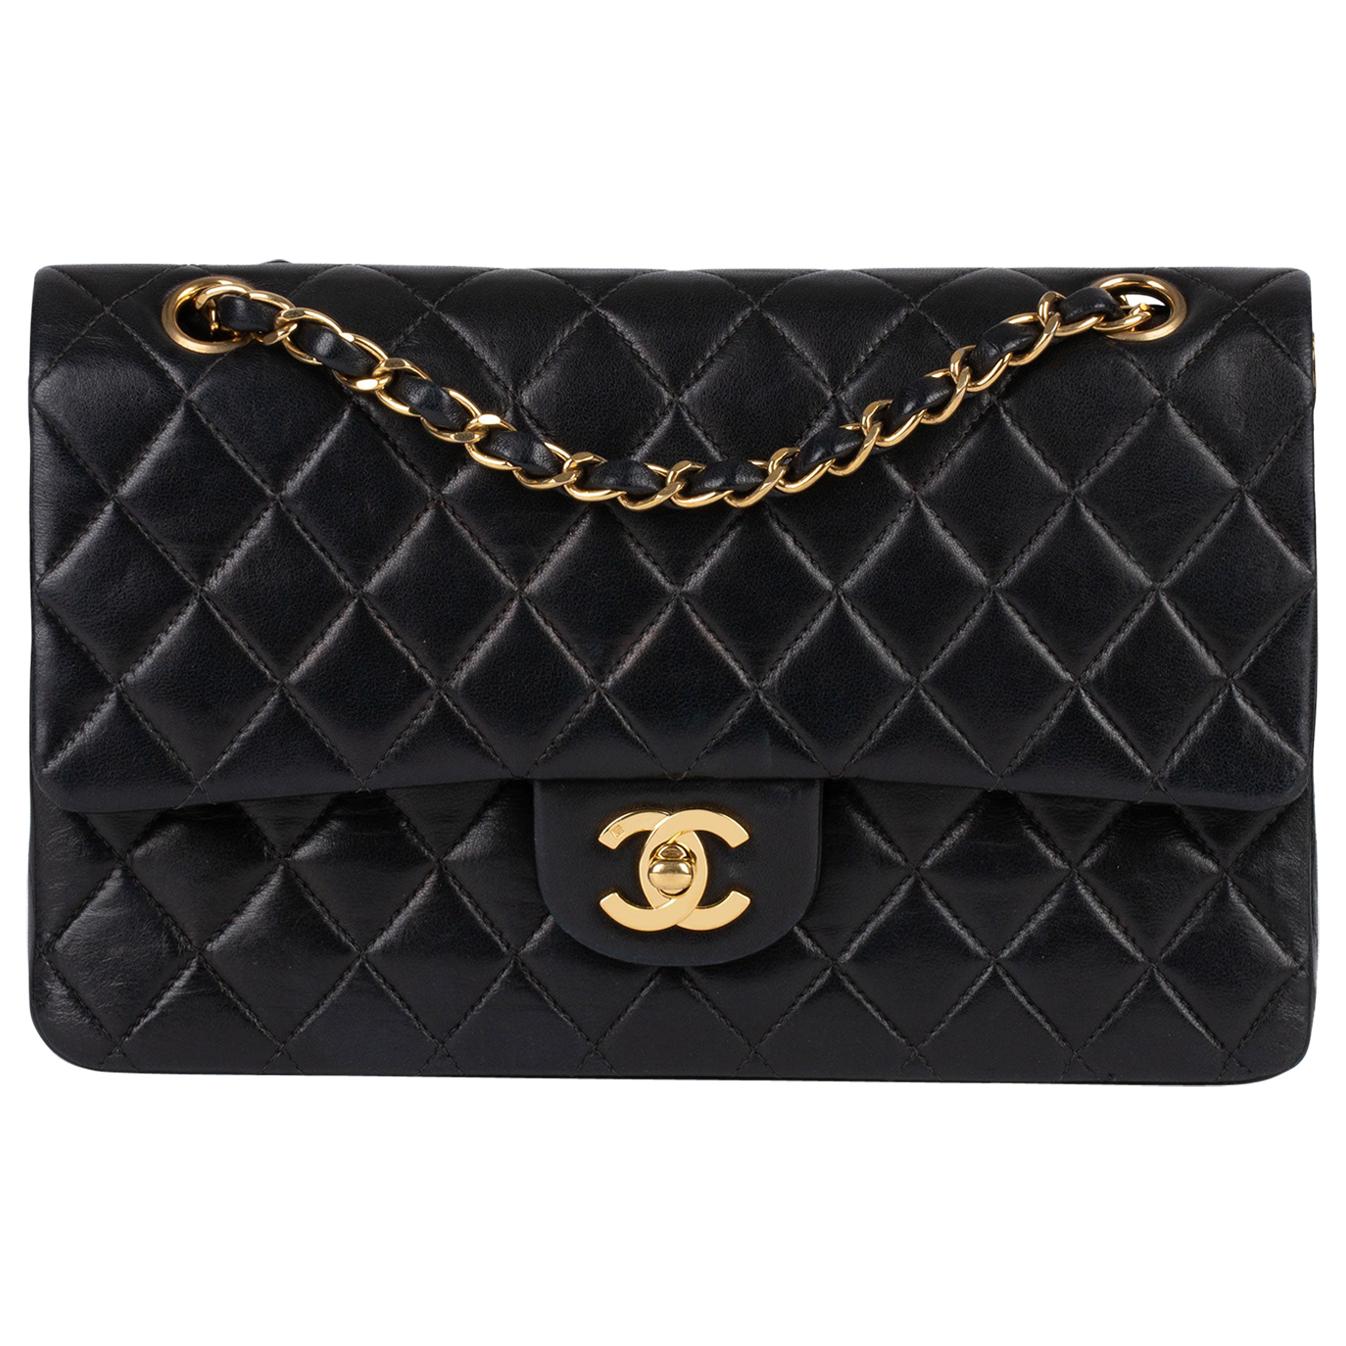 CHANEL Pre-Owned 2000-2002 Diamond Quilted Shoulder Bag - Black for Women